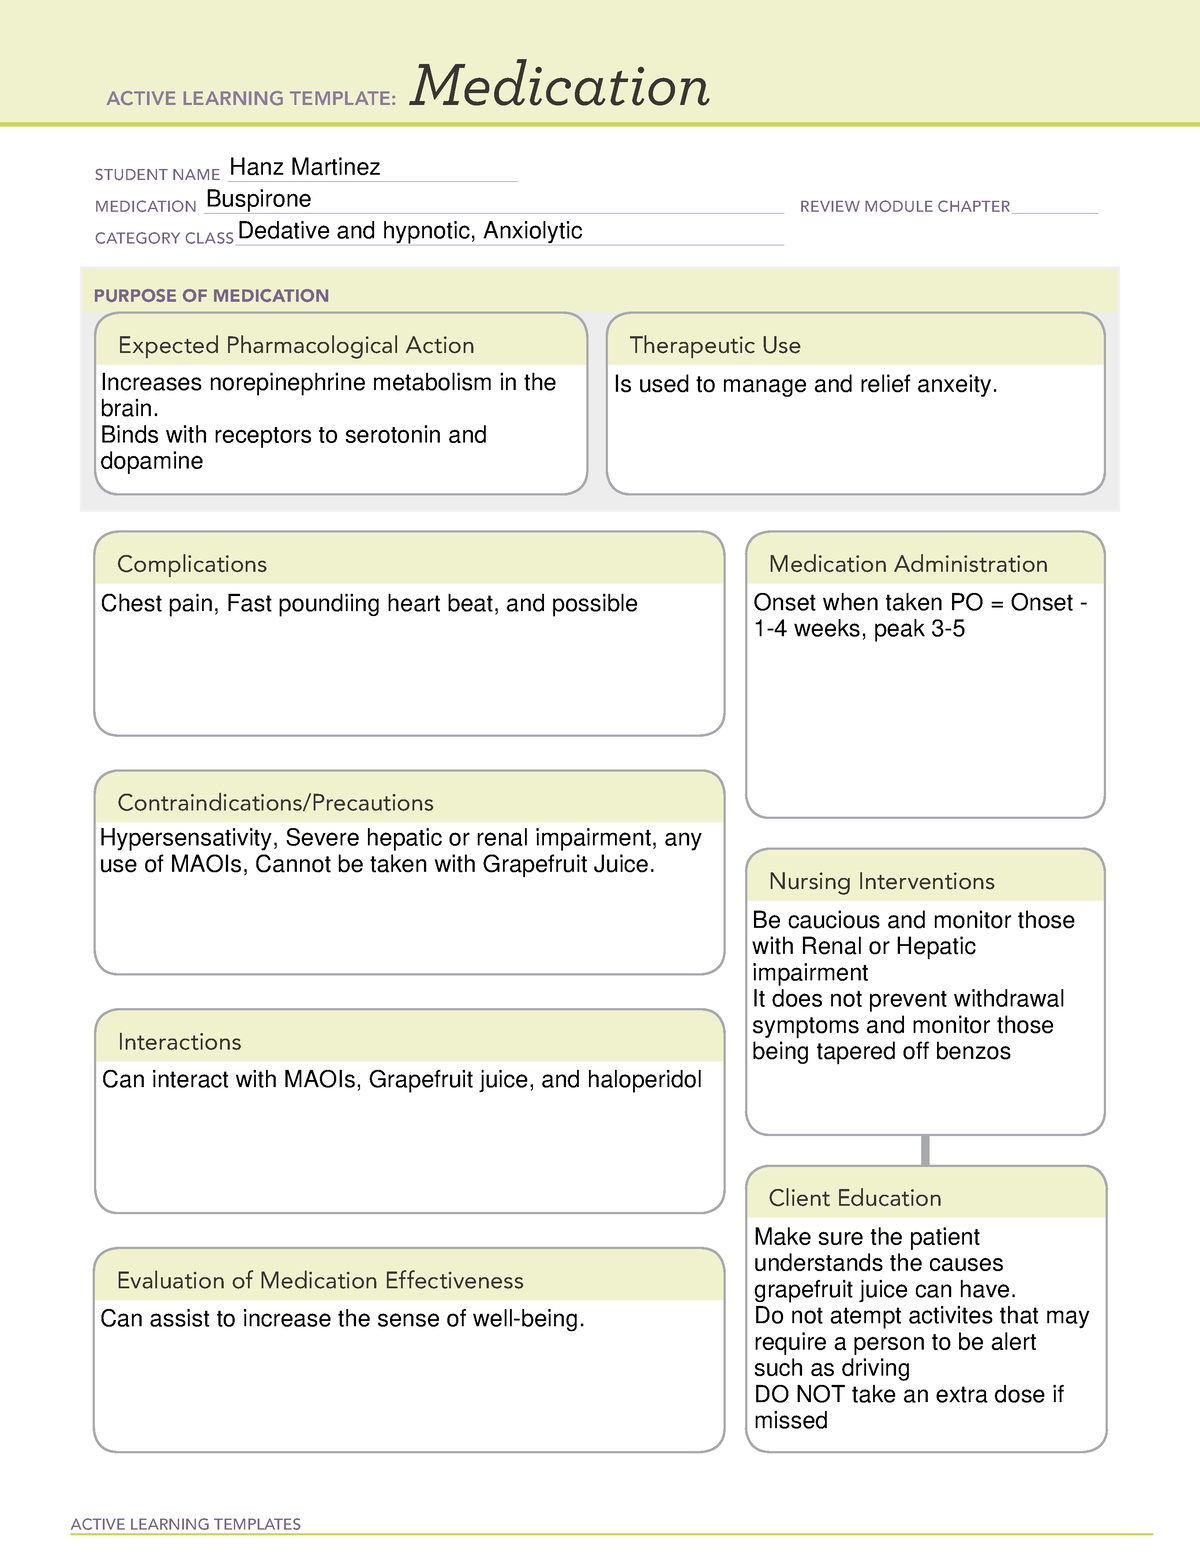 Buspirone Medication ATI template ACTIVE LEARNING TEMPLATES